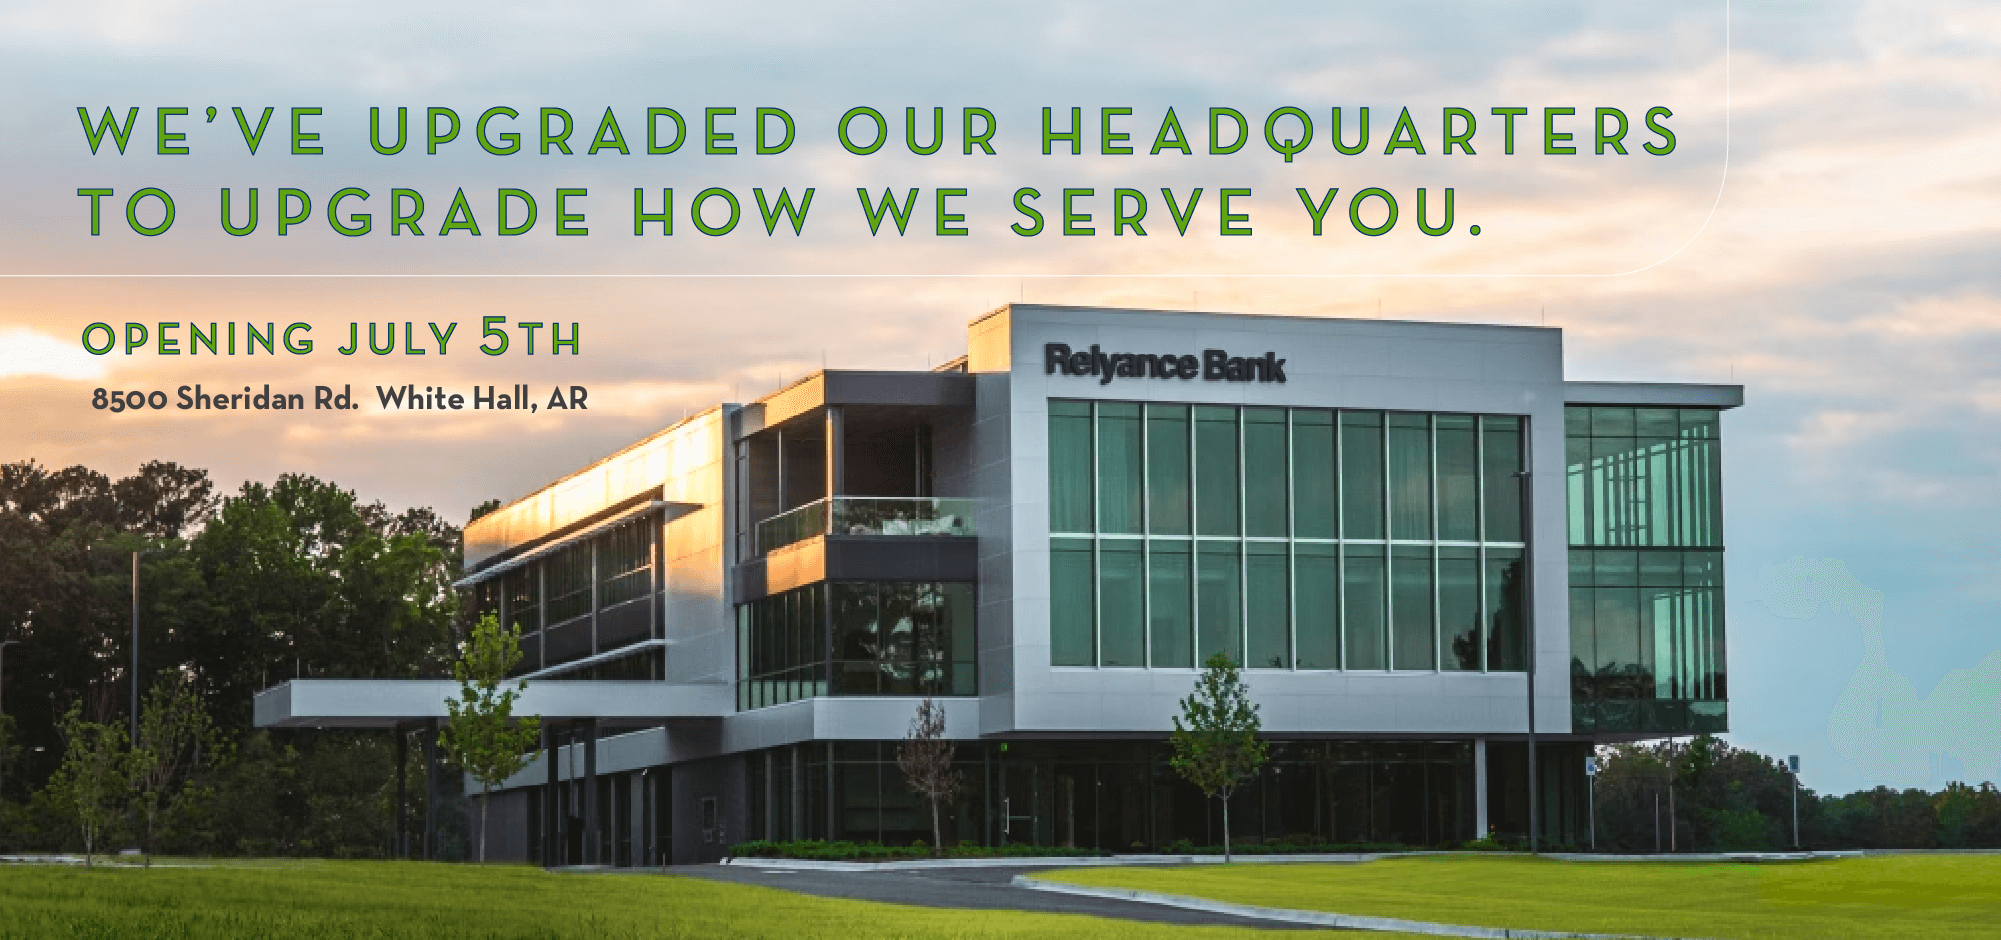 We've upgraded our headquarters to upgrade how we serve you. Opening July 5th